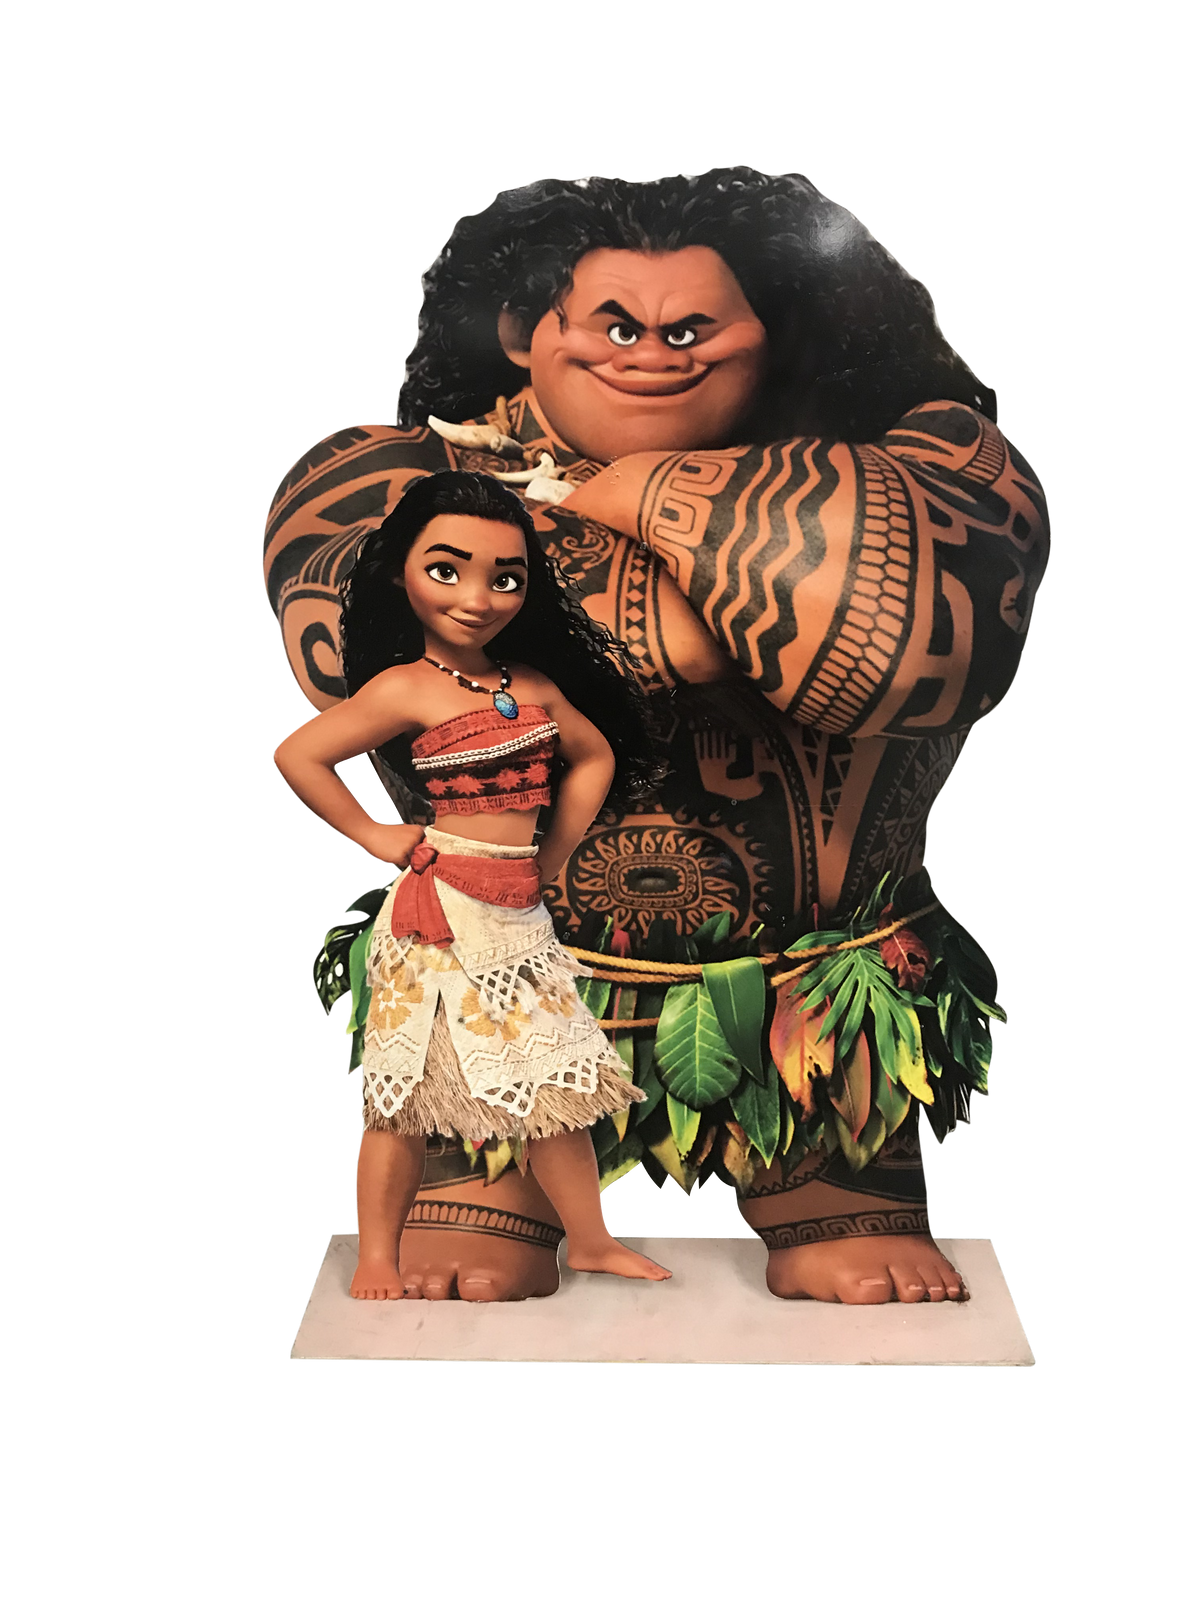 75+ Pictures Of Moana And Maui